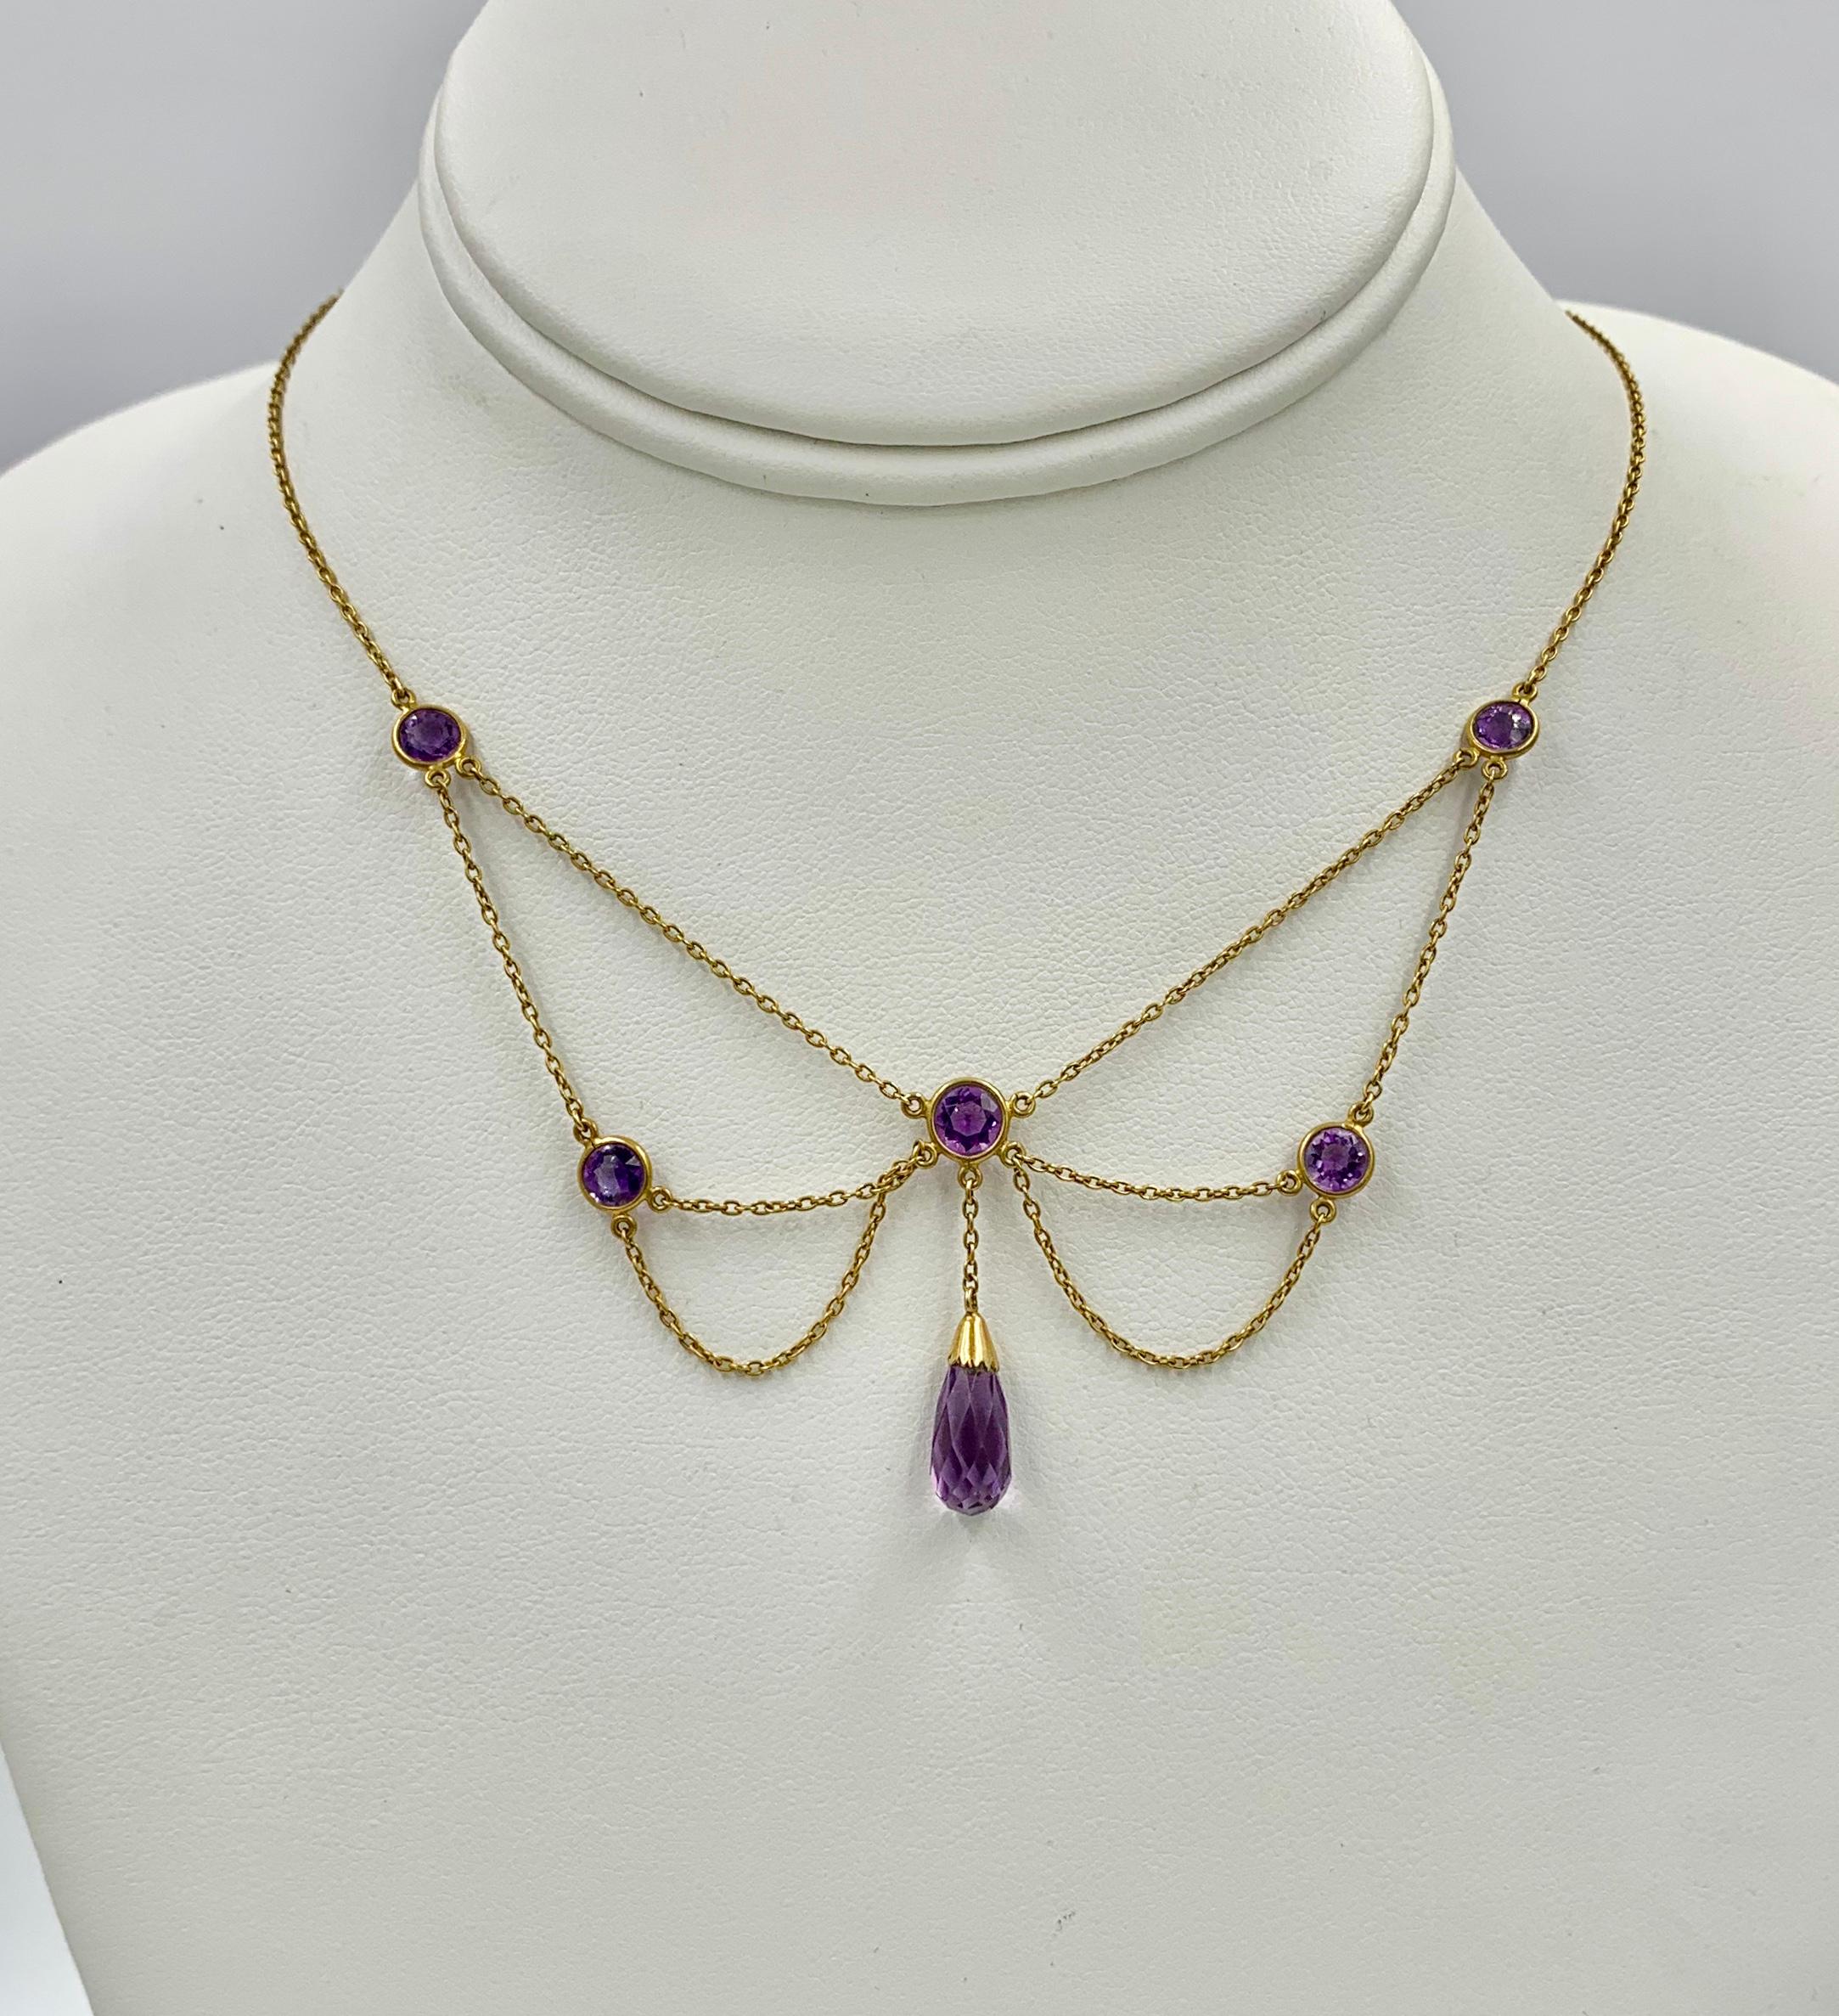 THIS IS A STUNNING VICTORIAN - ART NOUVEAU - BELLE EPOQUE FESTOON NECKLACE WITH THE MOST GORGEOUS NATURAL ROUND AND BRIOLETTE CUT SIBERIAN AMETHYST GEMS SET IN A GORGEOUS OPEN WORK FESTOON SWAG DESIGN IN 14 KARAT ROSE GOLD DATING TO CIRCA